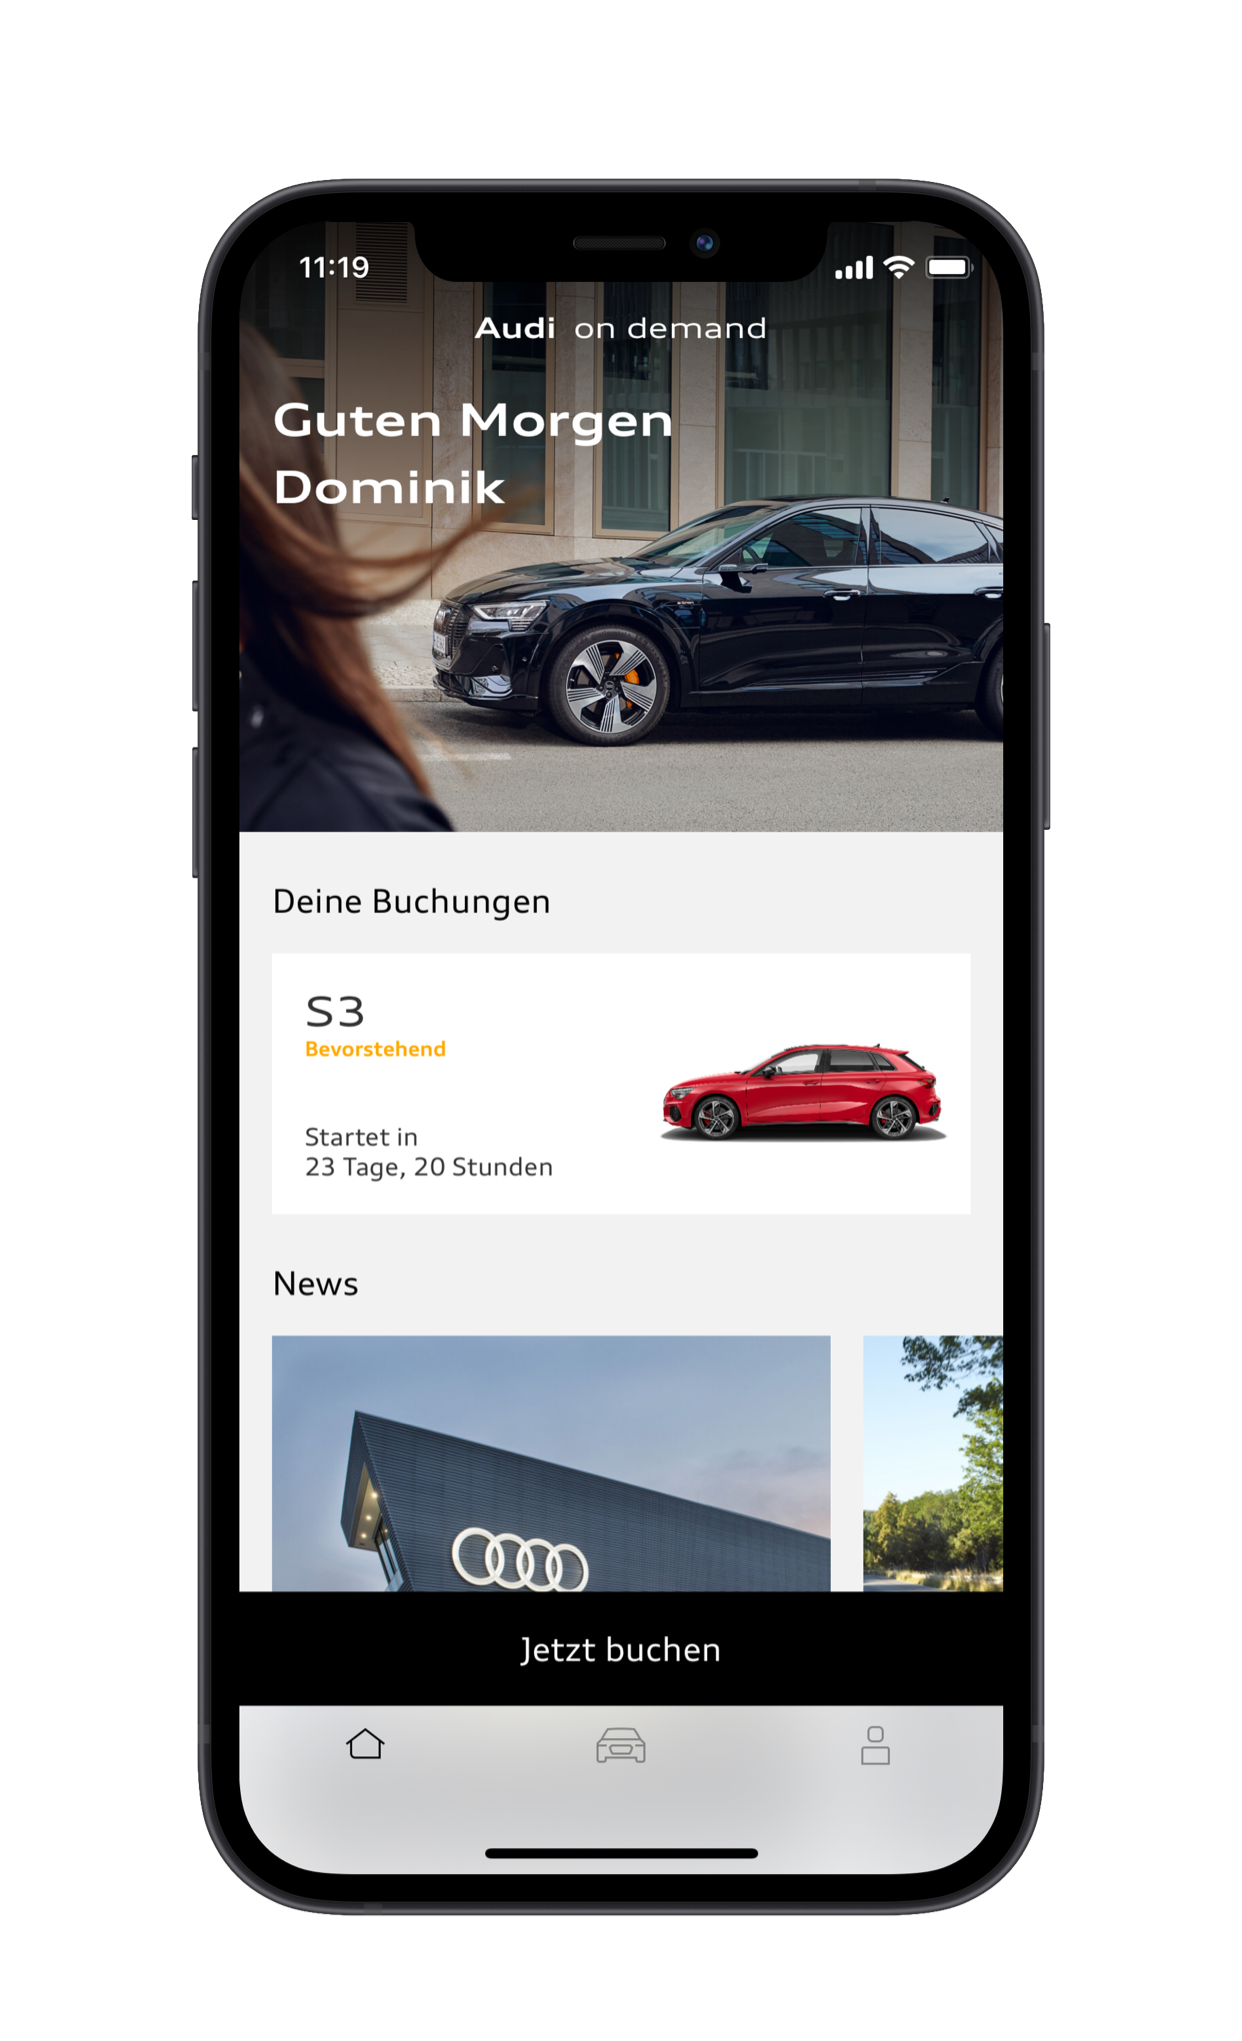 Audi further extends the premium-mobility service ‘Audi on demand’ in Germany